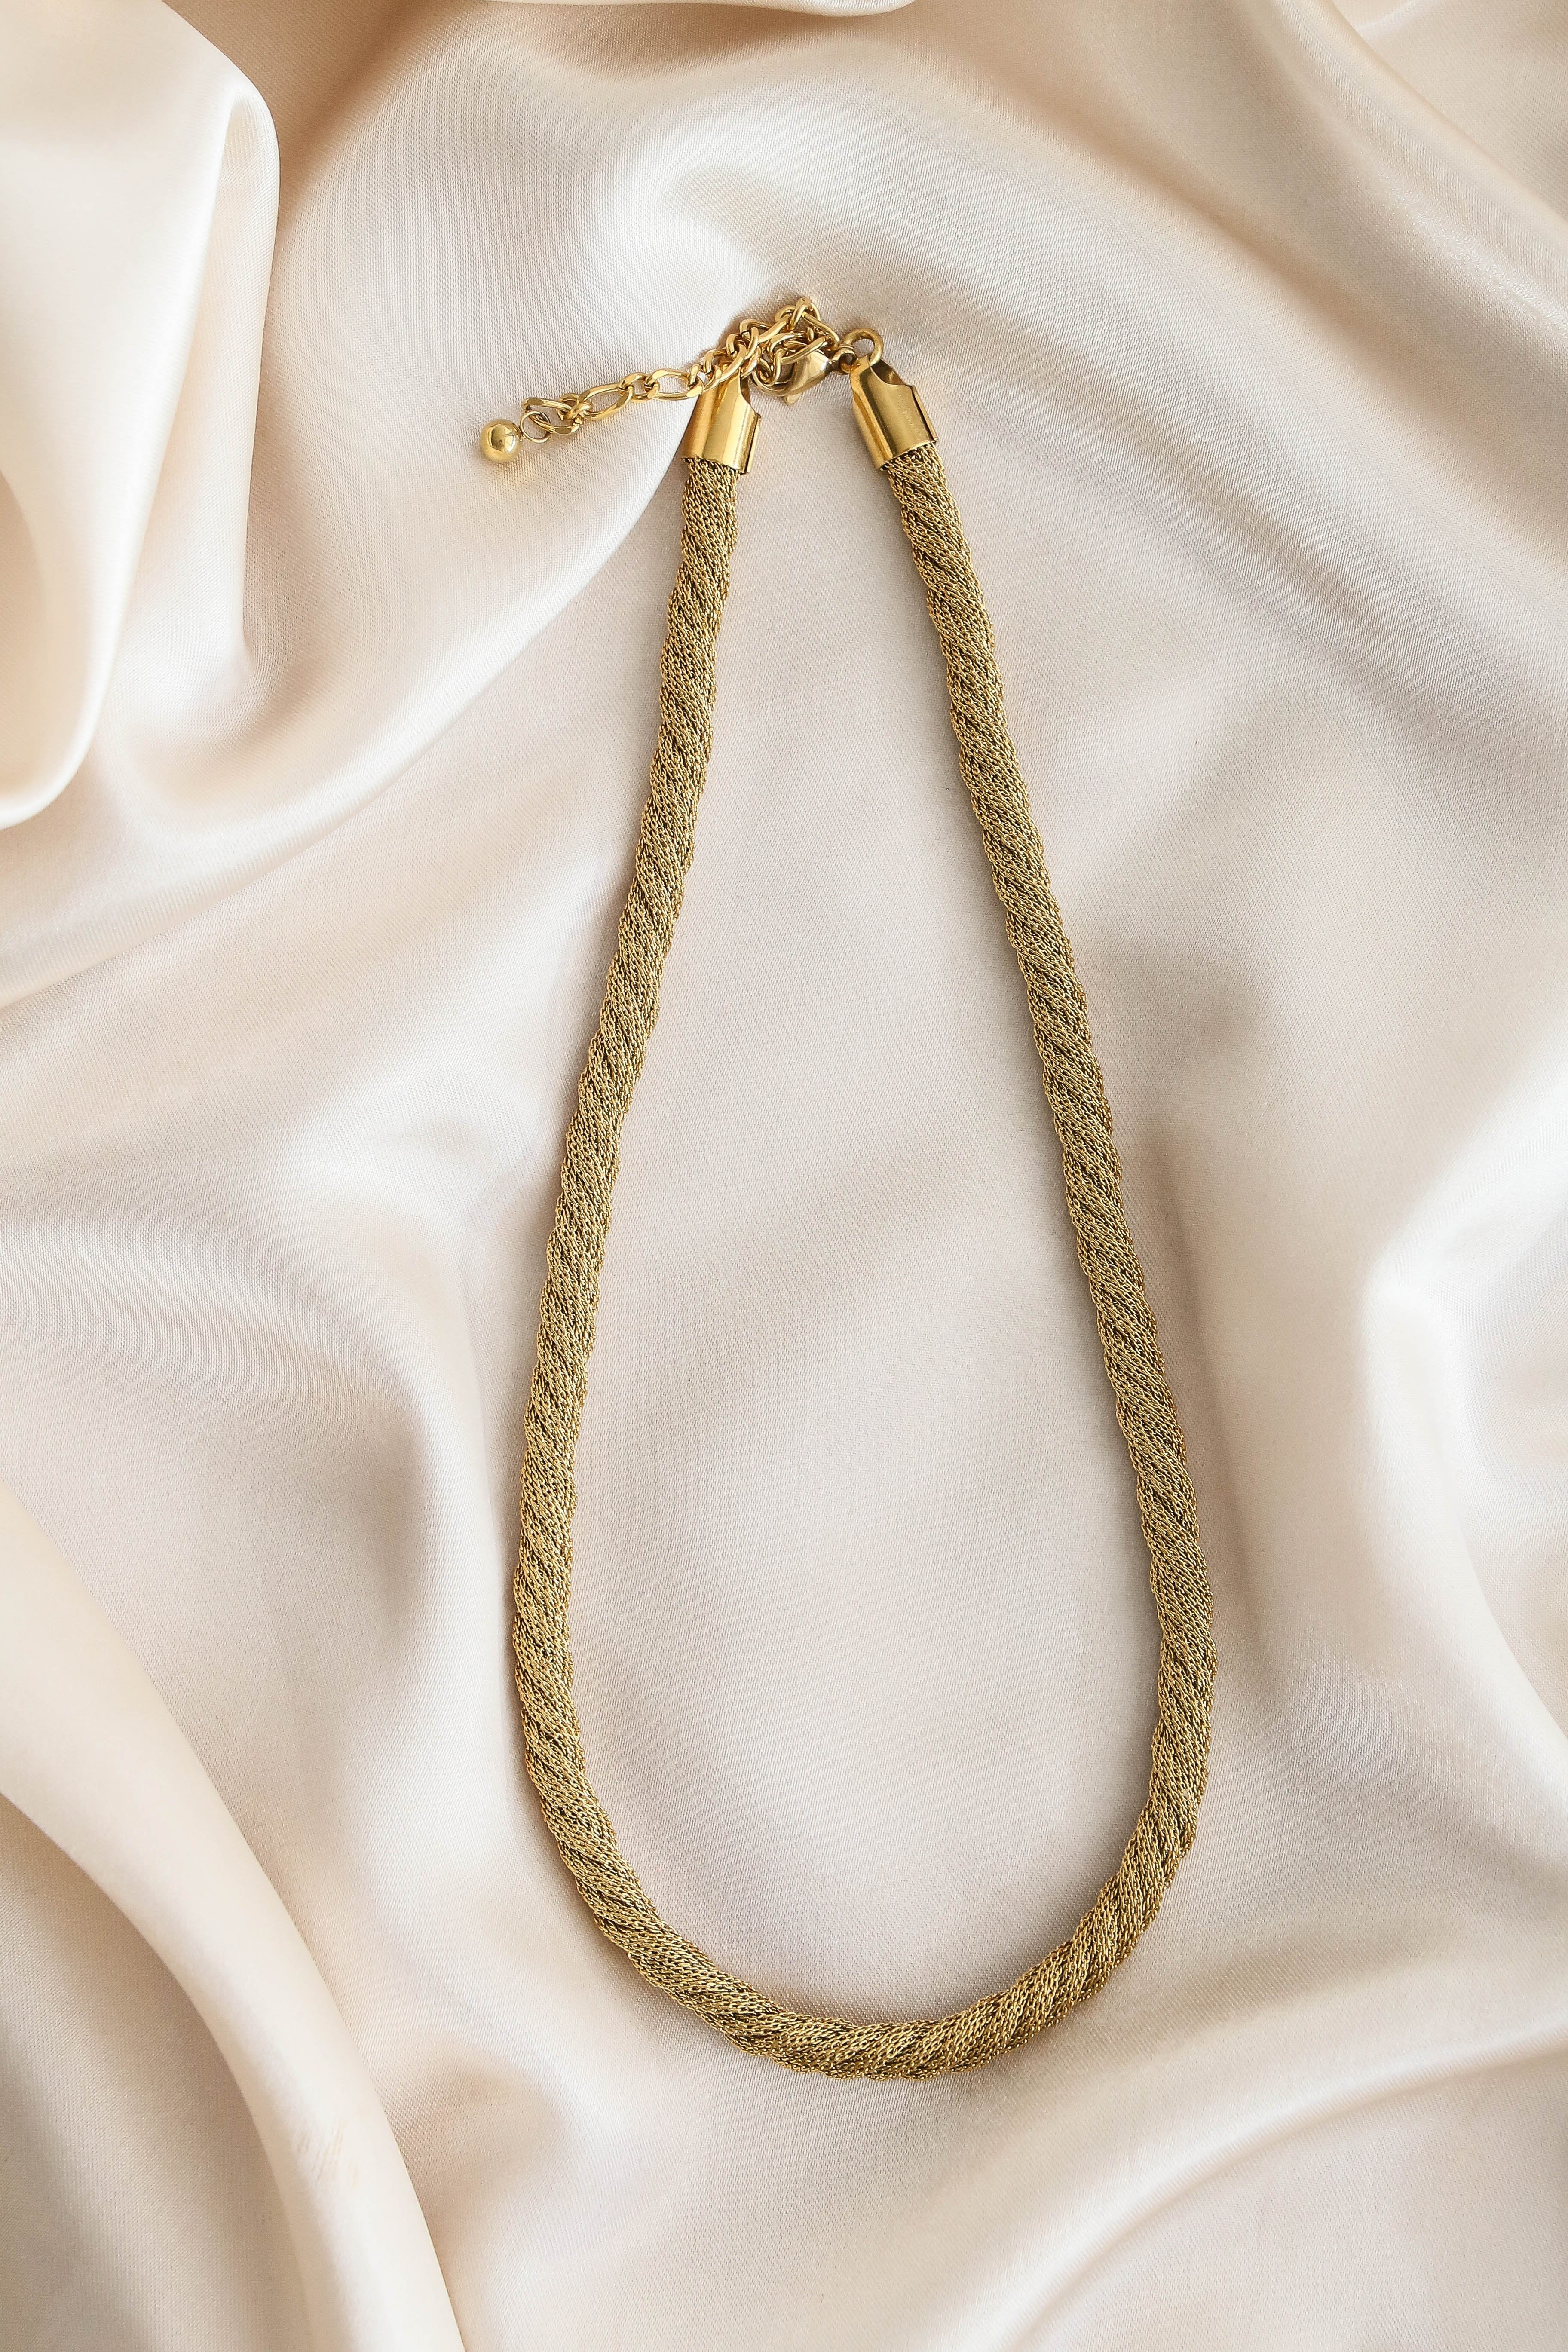 Marina Necklace - Boutique Minimaliste has waterproof, durable, elegant and vintage inspired jewelry